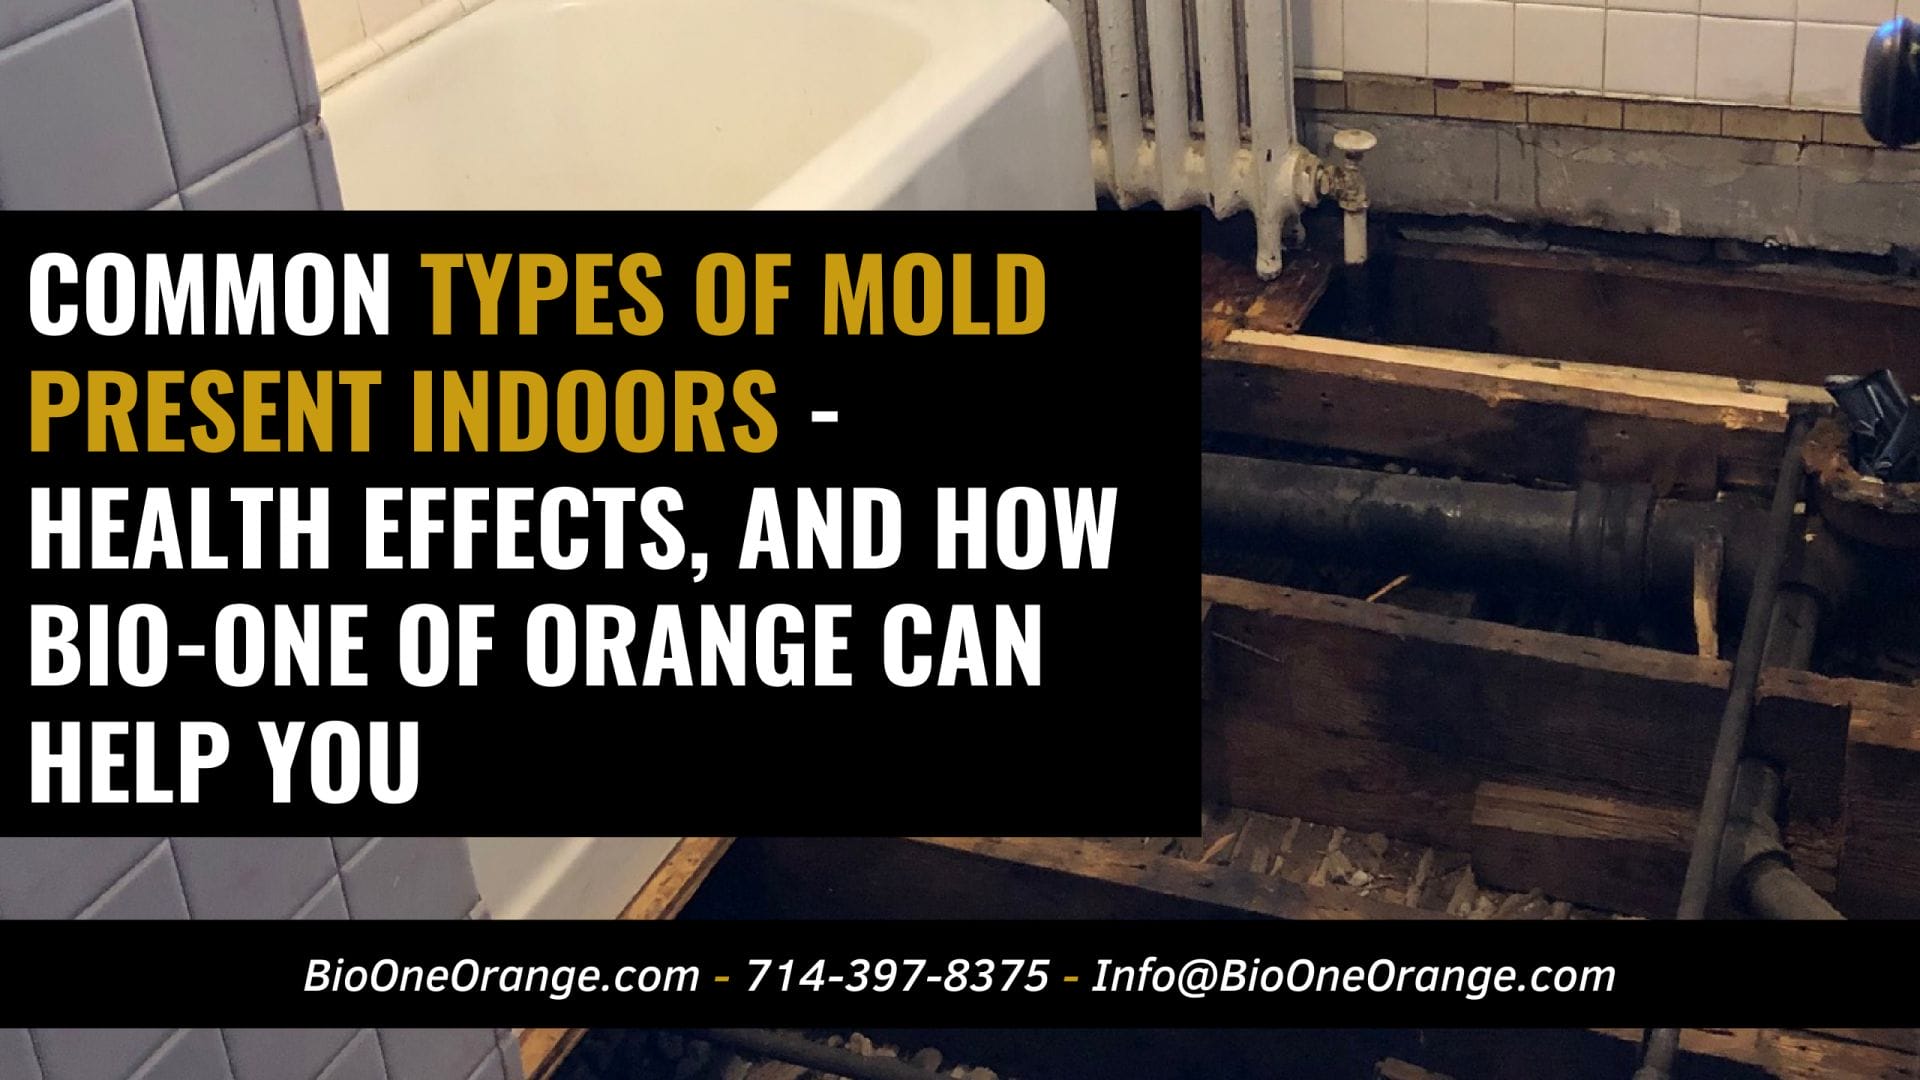 Common types of mold present indoors - Health effects, and how Bio-One of Orange can help you